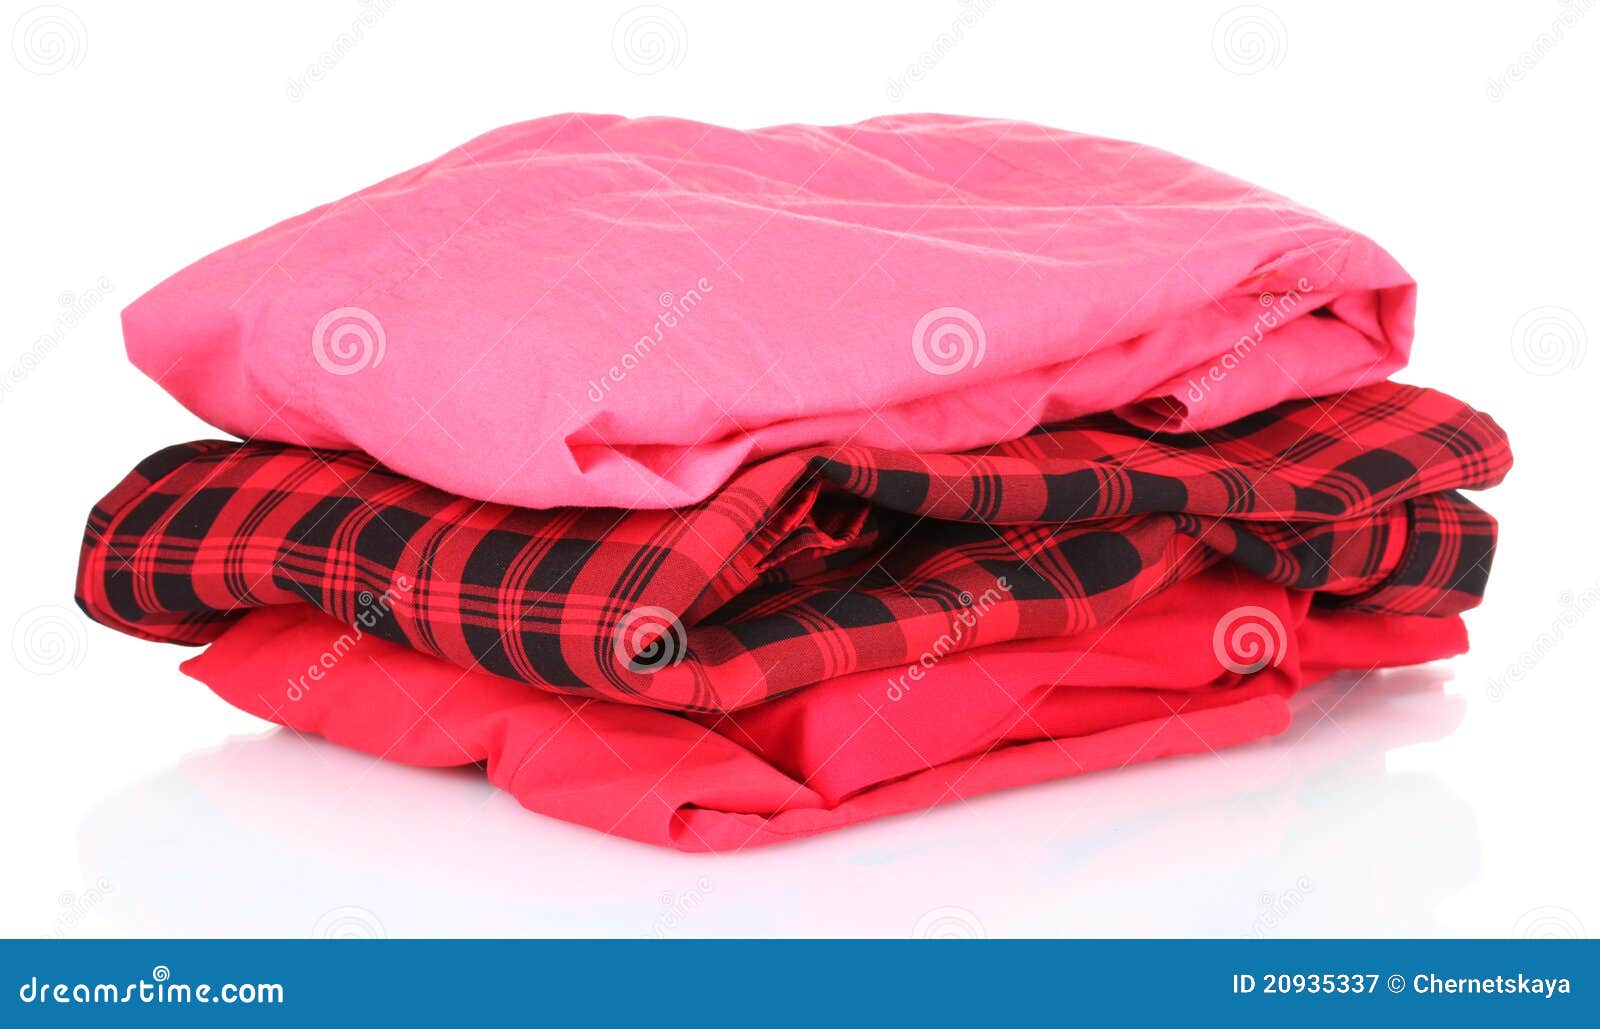 Pile of clothes stock image. Image of human, comfort - 20935337